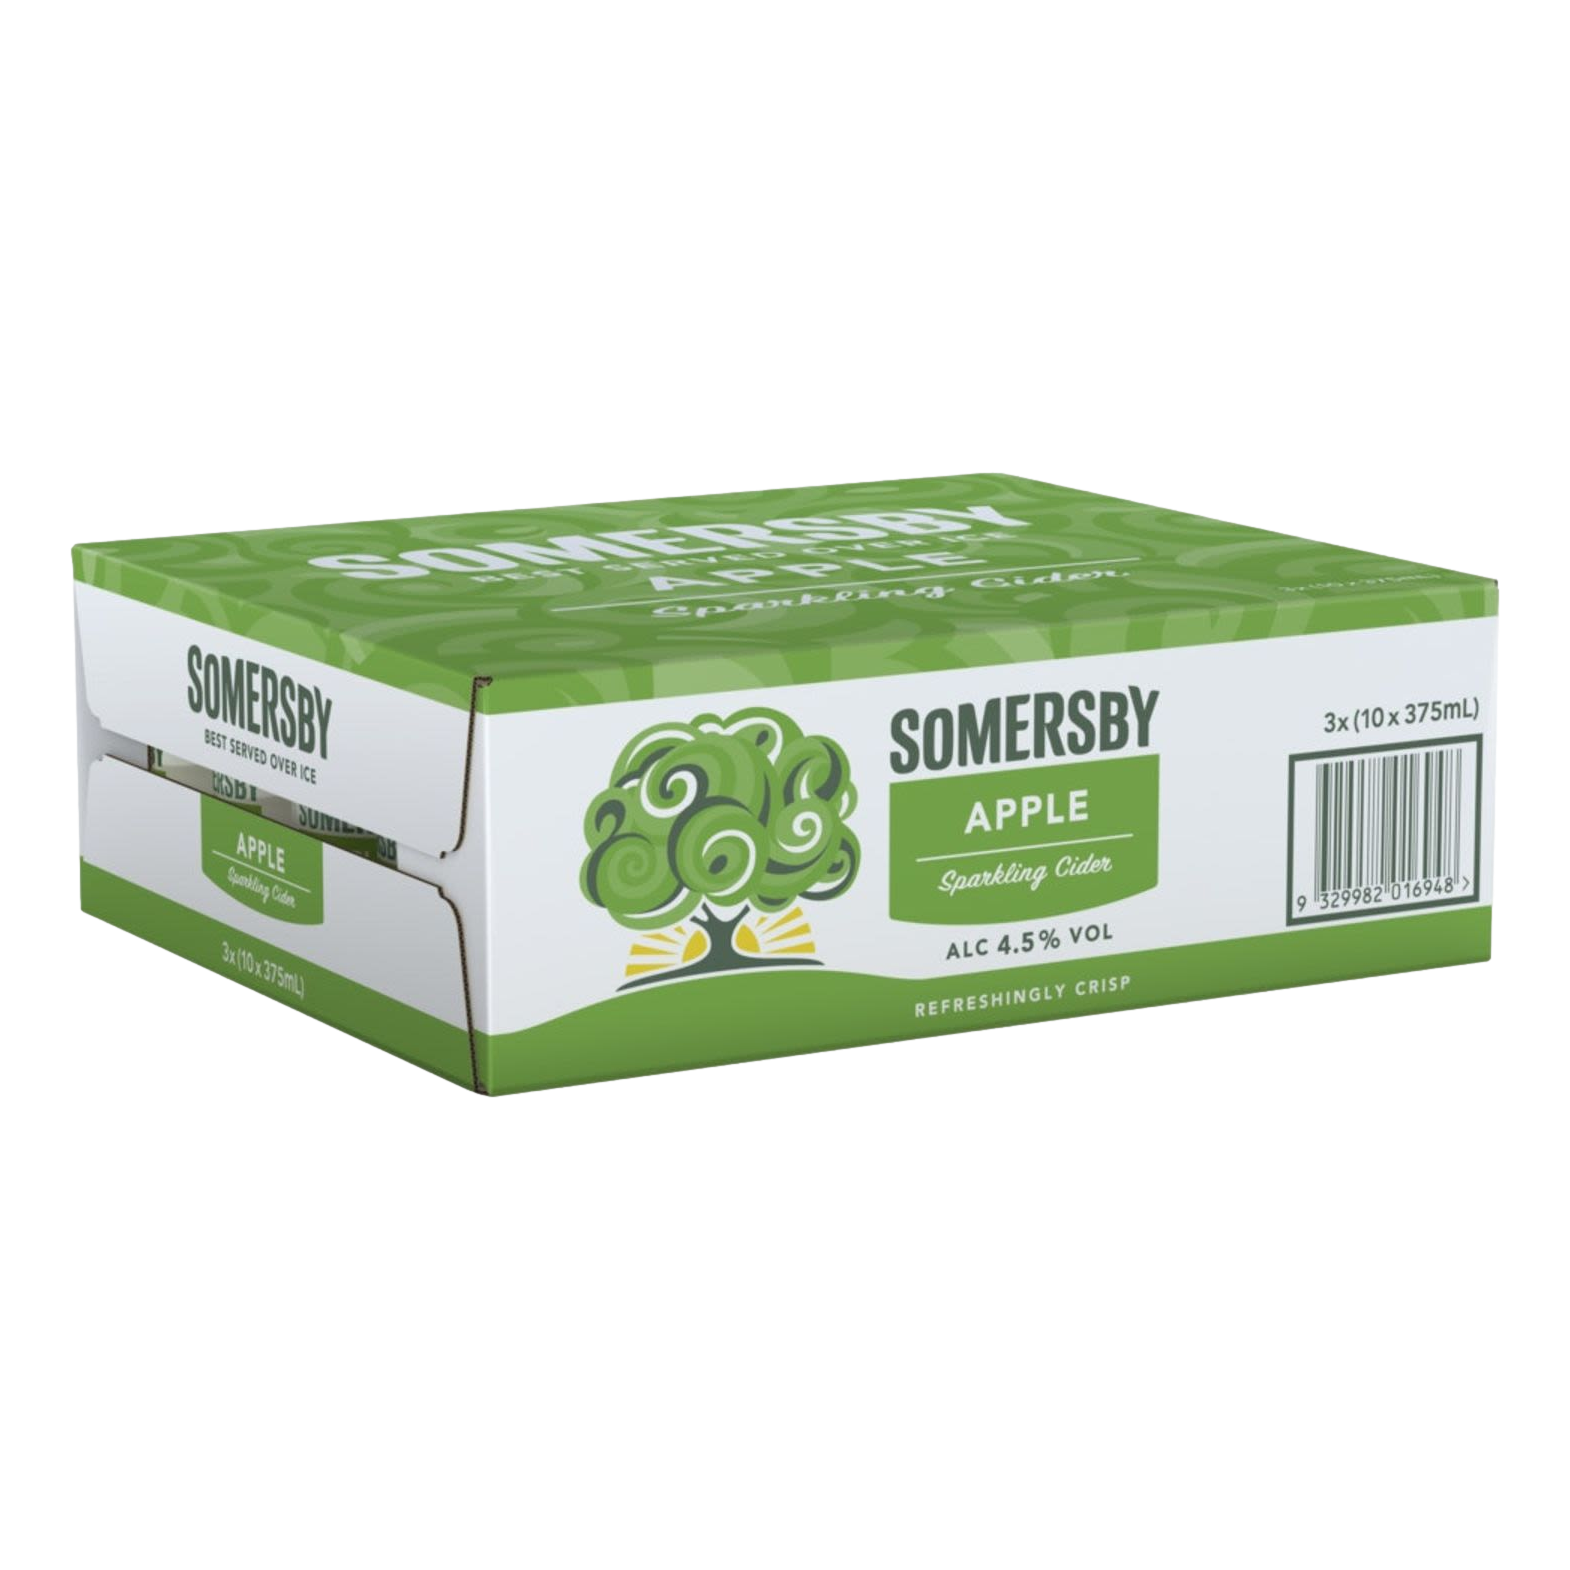 Somersby Apple Cider 375ml Can Case of 30